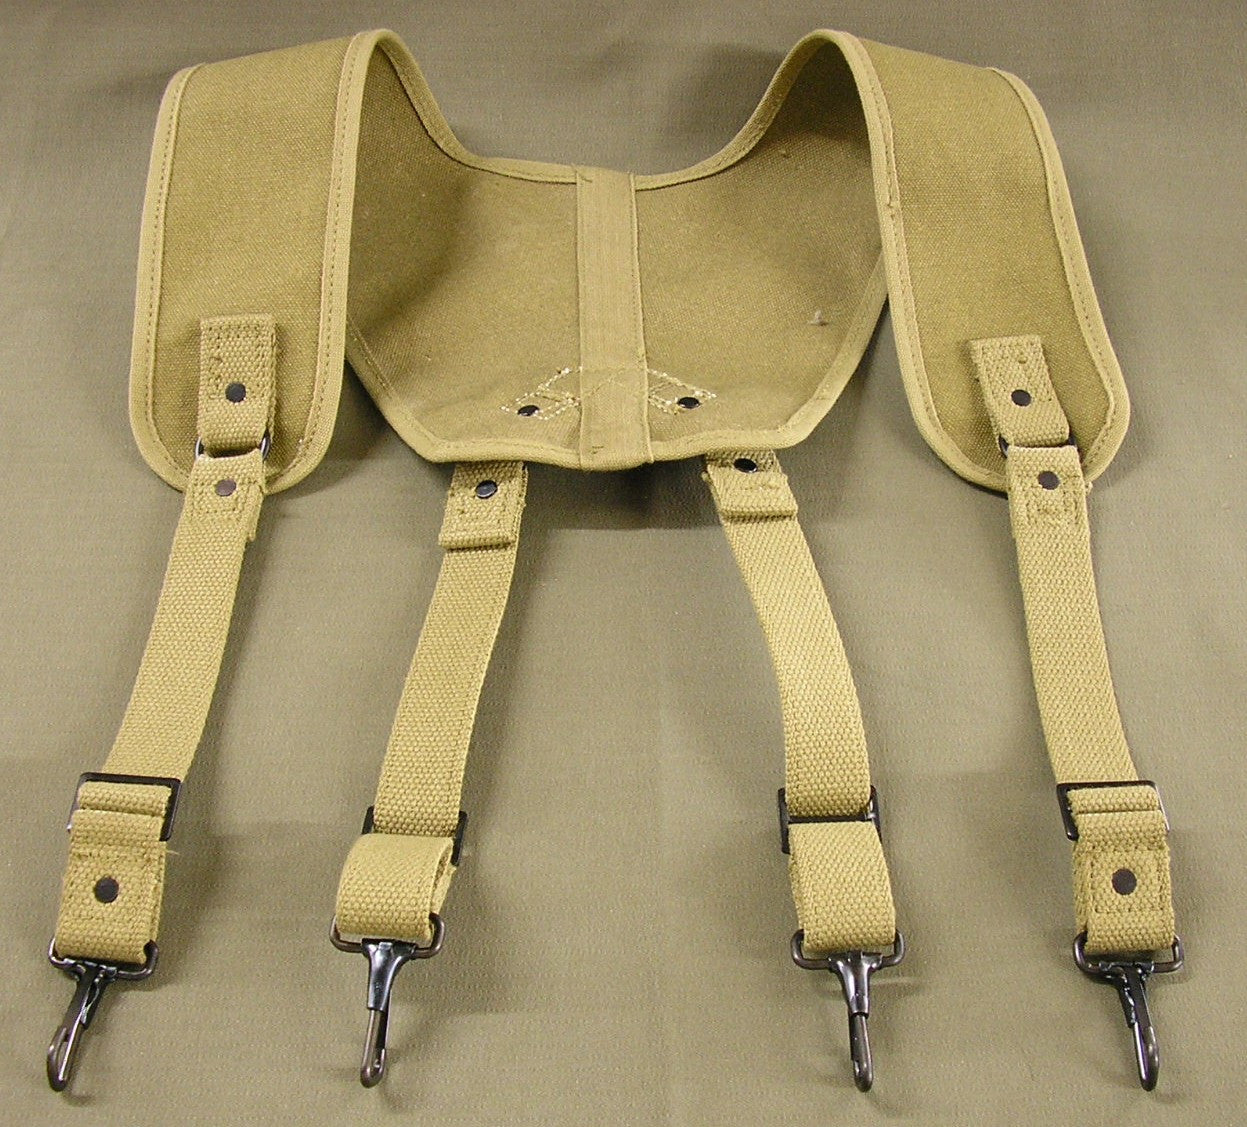 Suspenders, Medical, Kit Component CLOSEOUT sold as-is. All sales final.